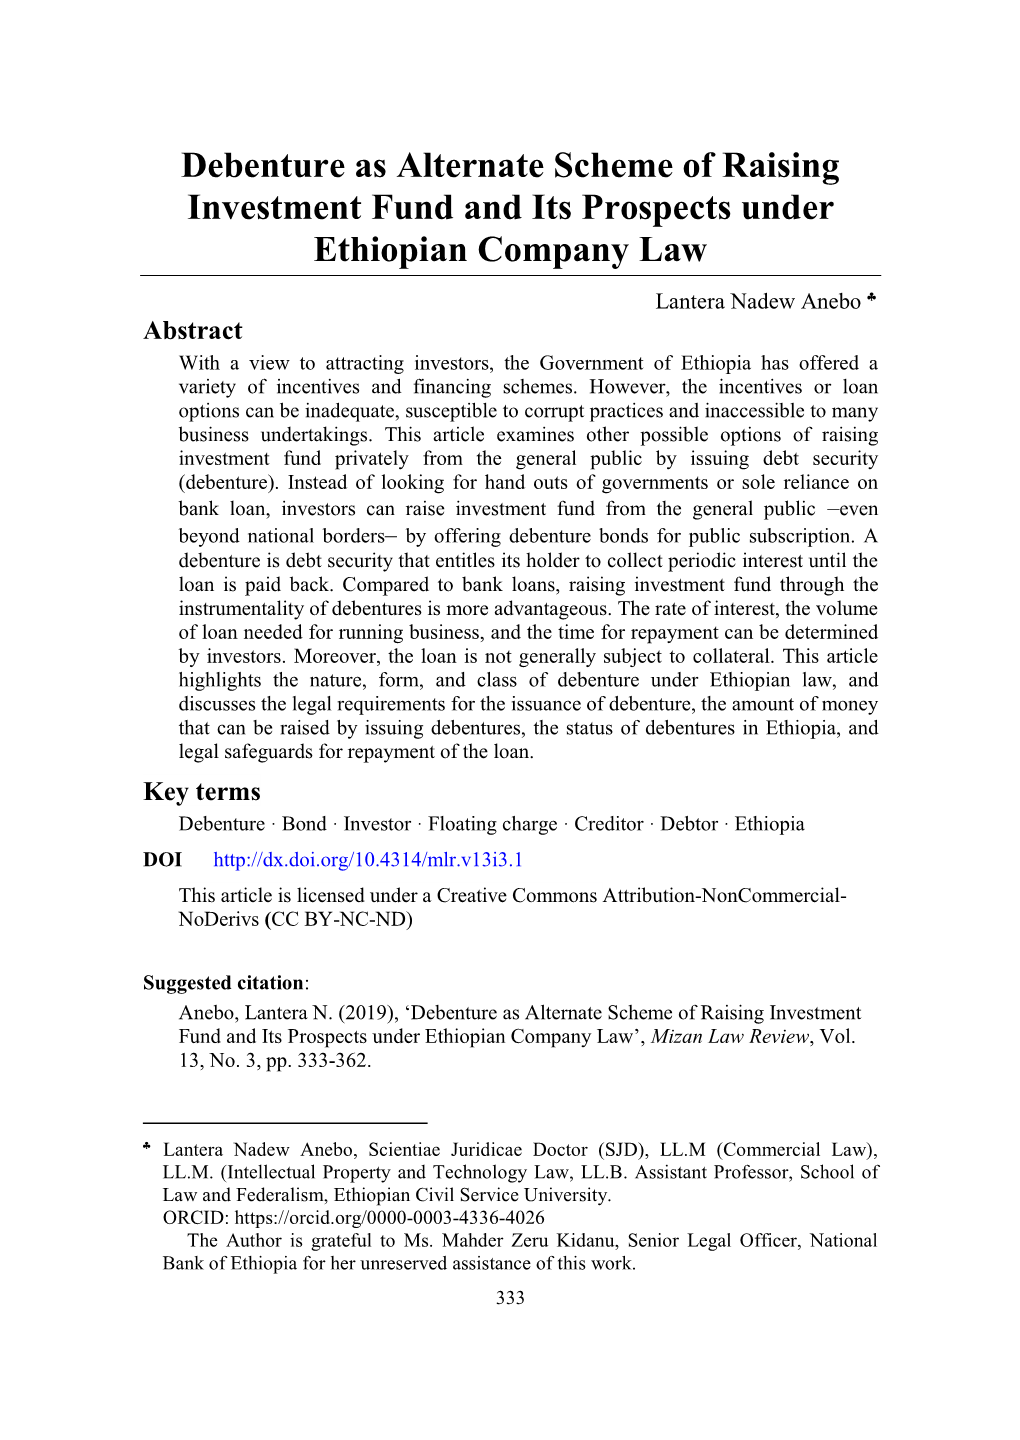 Debenture As Alternate Scheme of Raising Investment Fund and Its Prospects Under Ethiopian Company Law